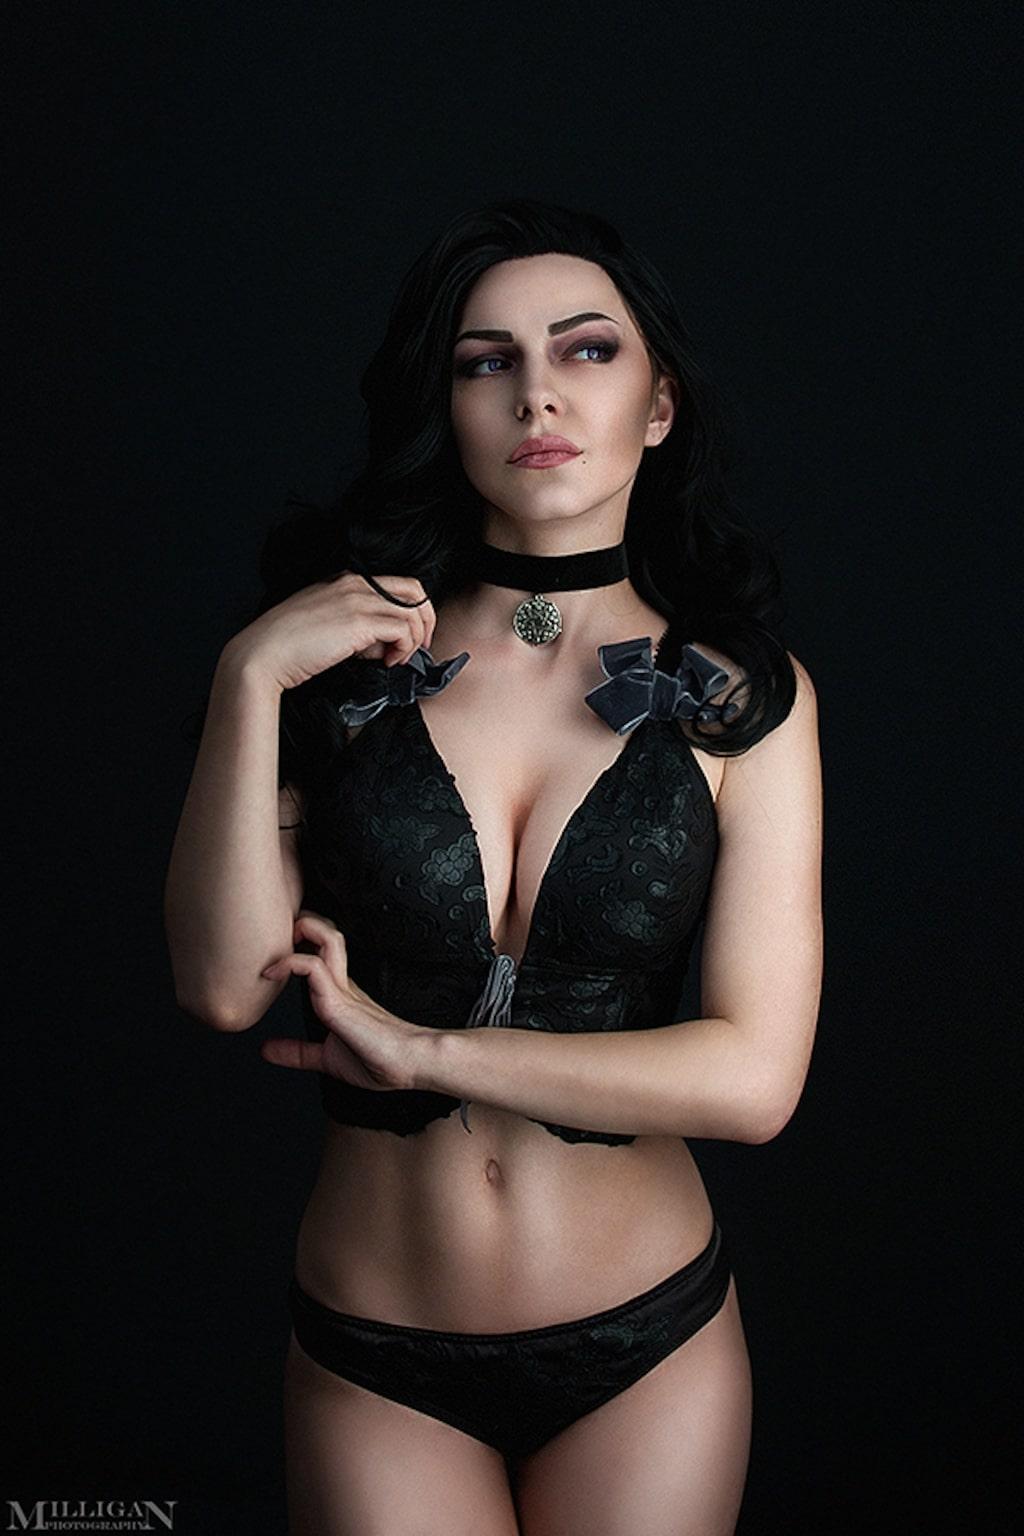 Hot Pictures Of Yennefer From The Witcher Series Which Will Make